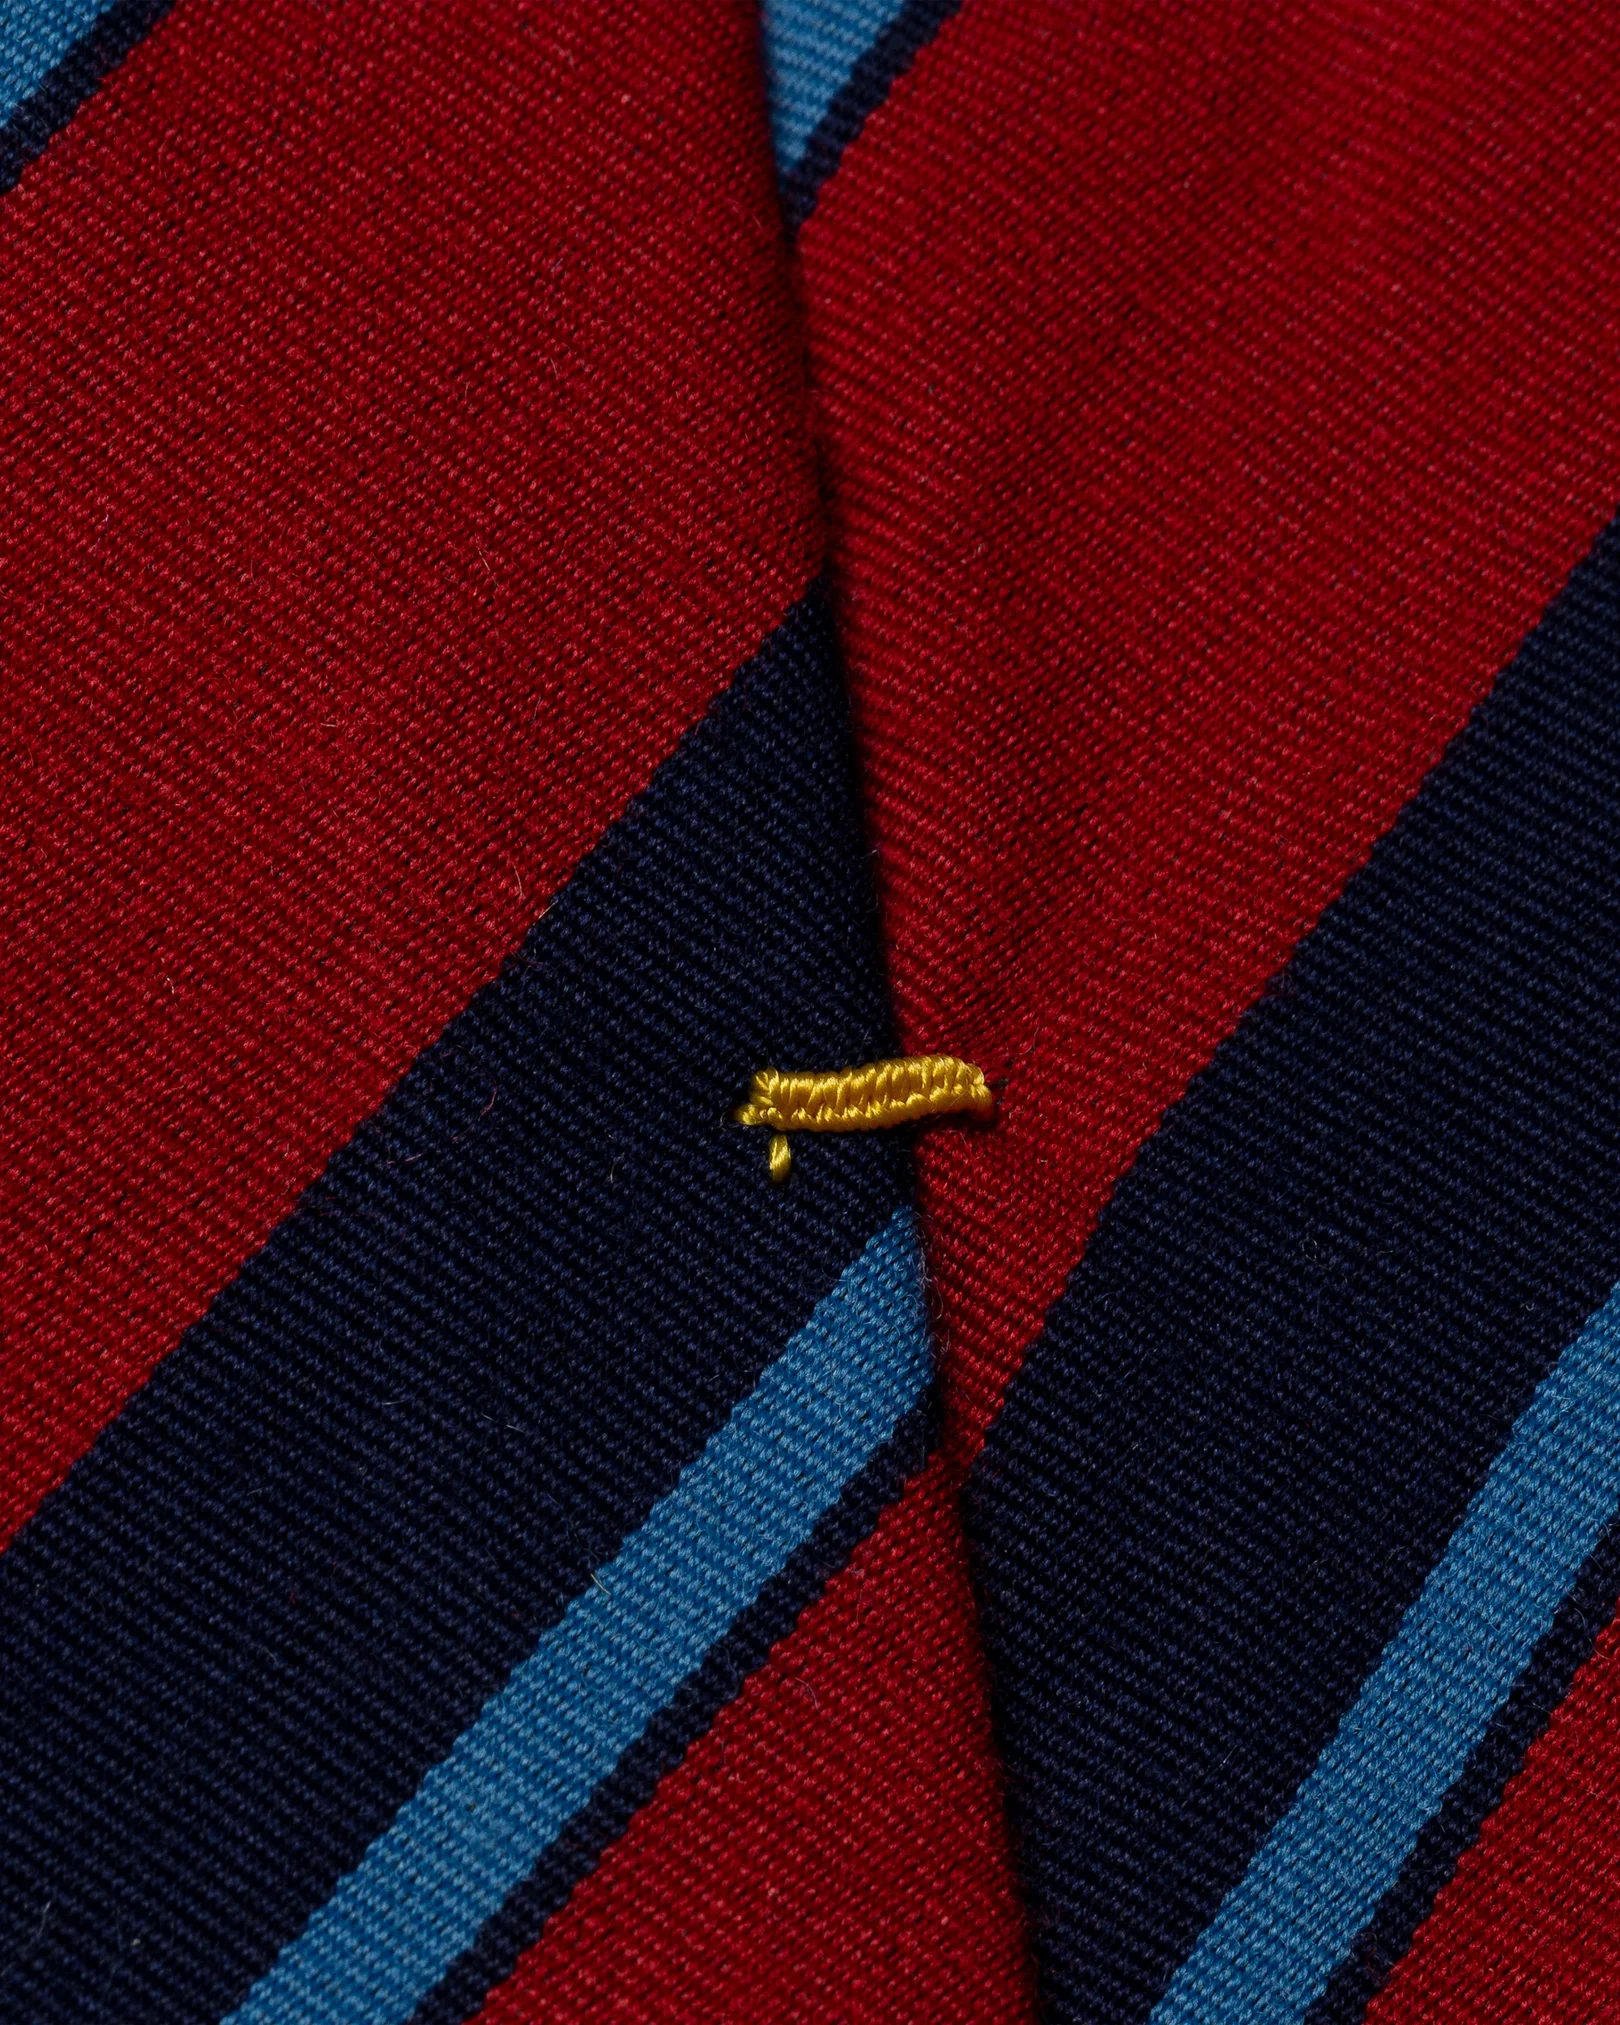 Eton - red and blue striped wool cotton tie